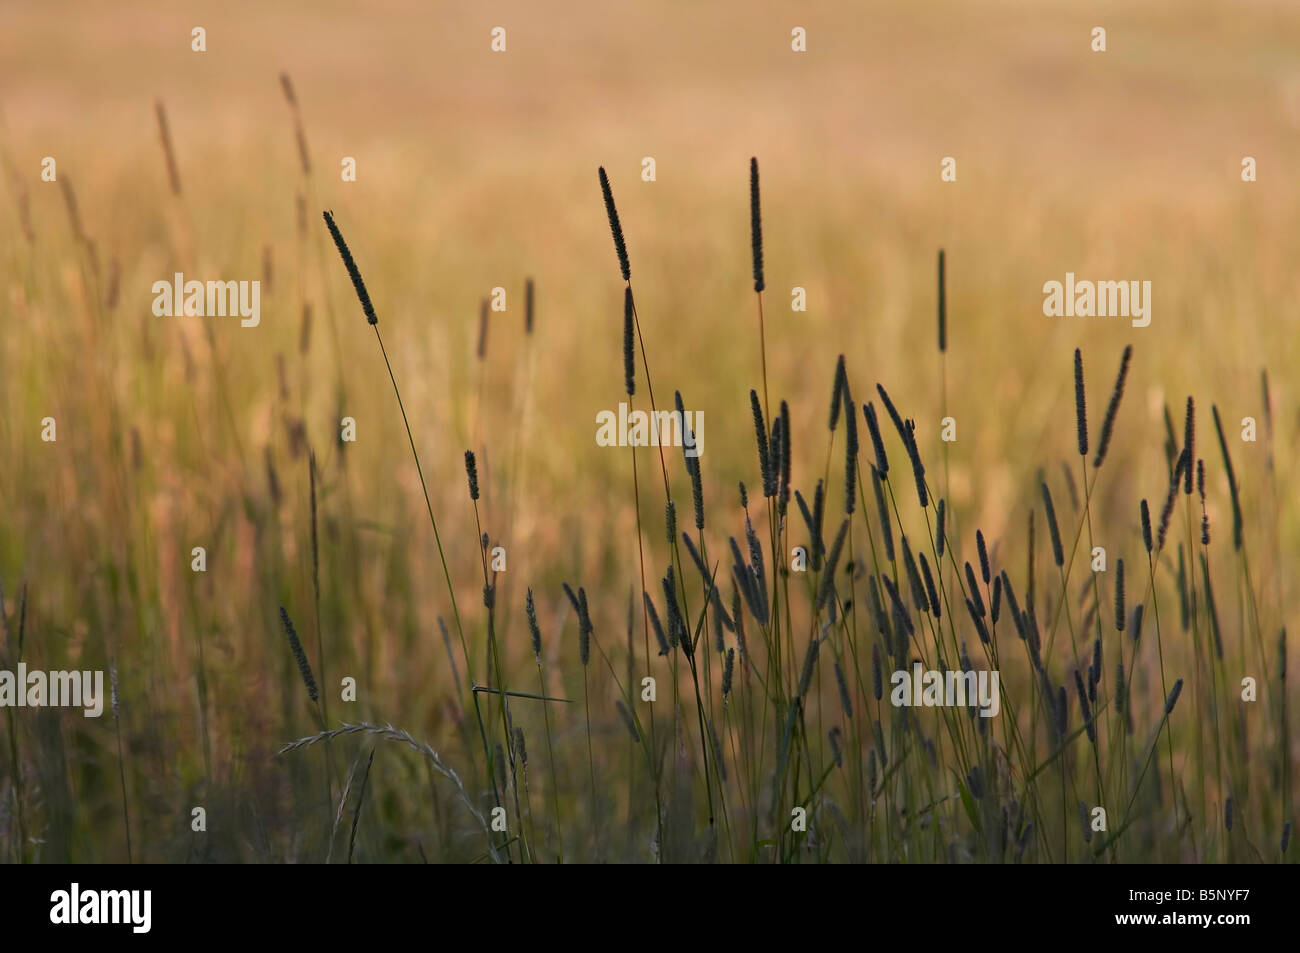 Abstract shot of the blades of grass - evening Stock Photo